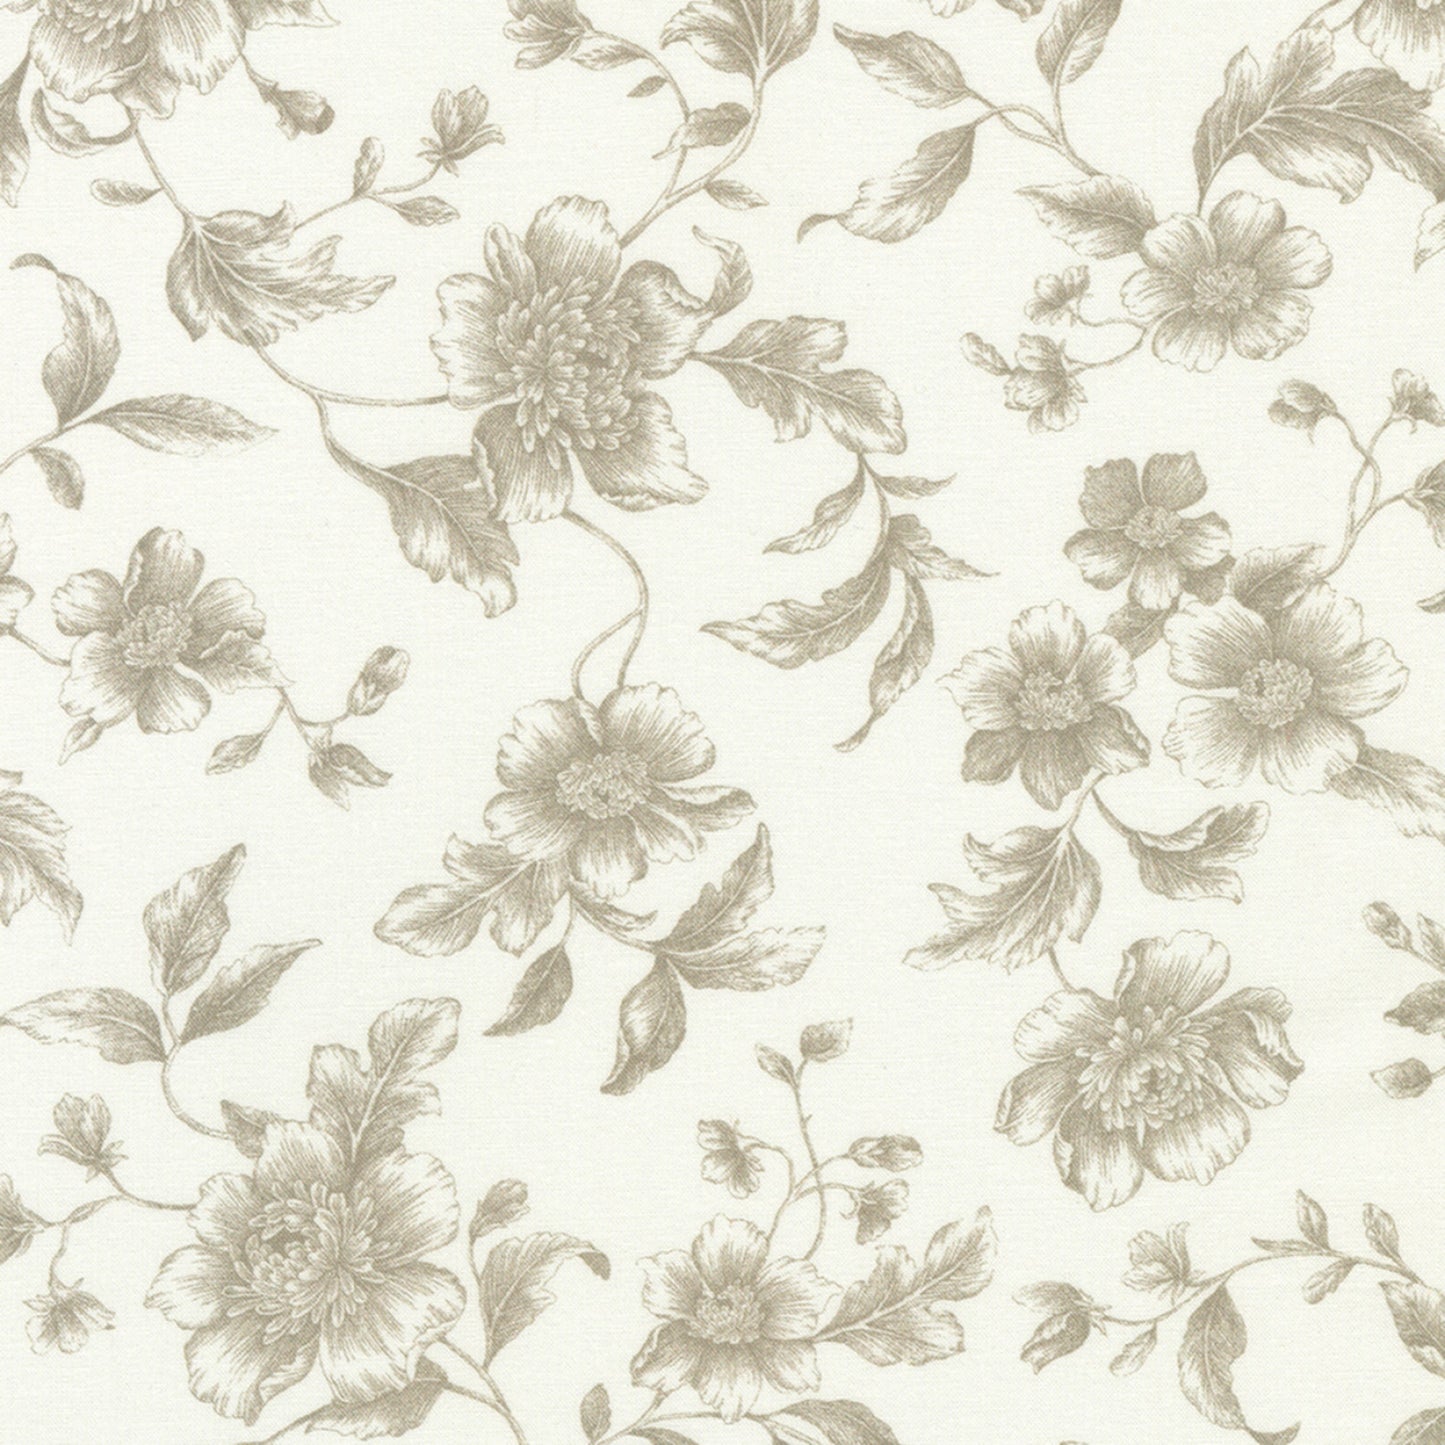 Camille- Natural Toile: Sold by the 1/2 yard.